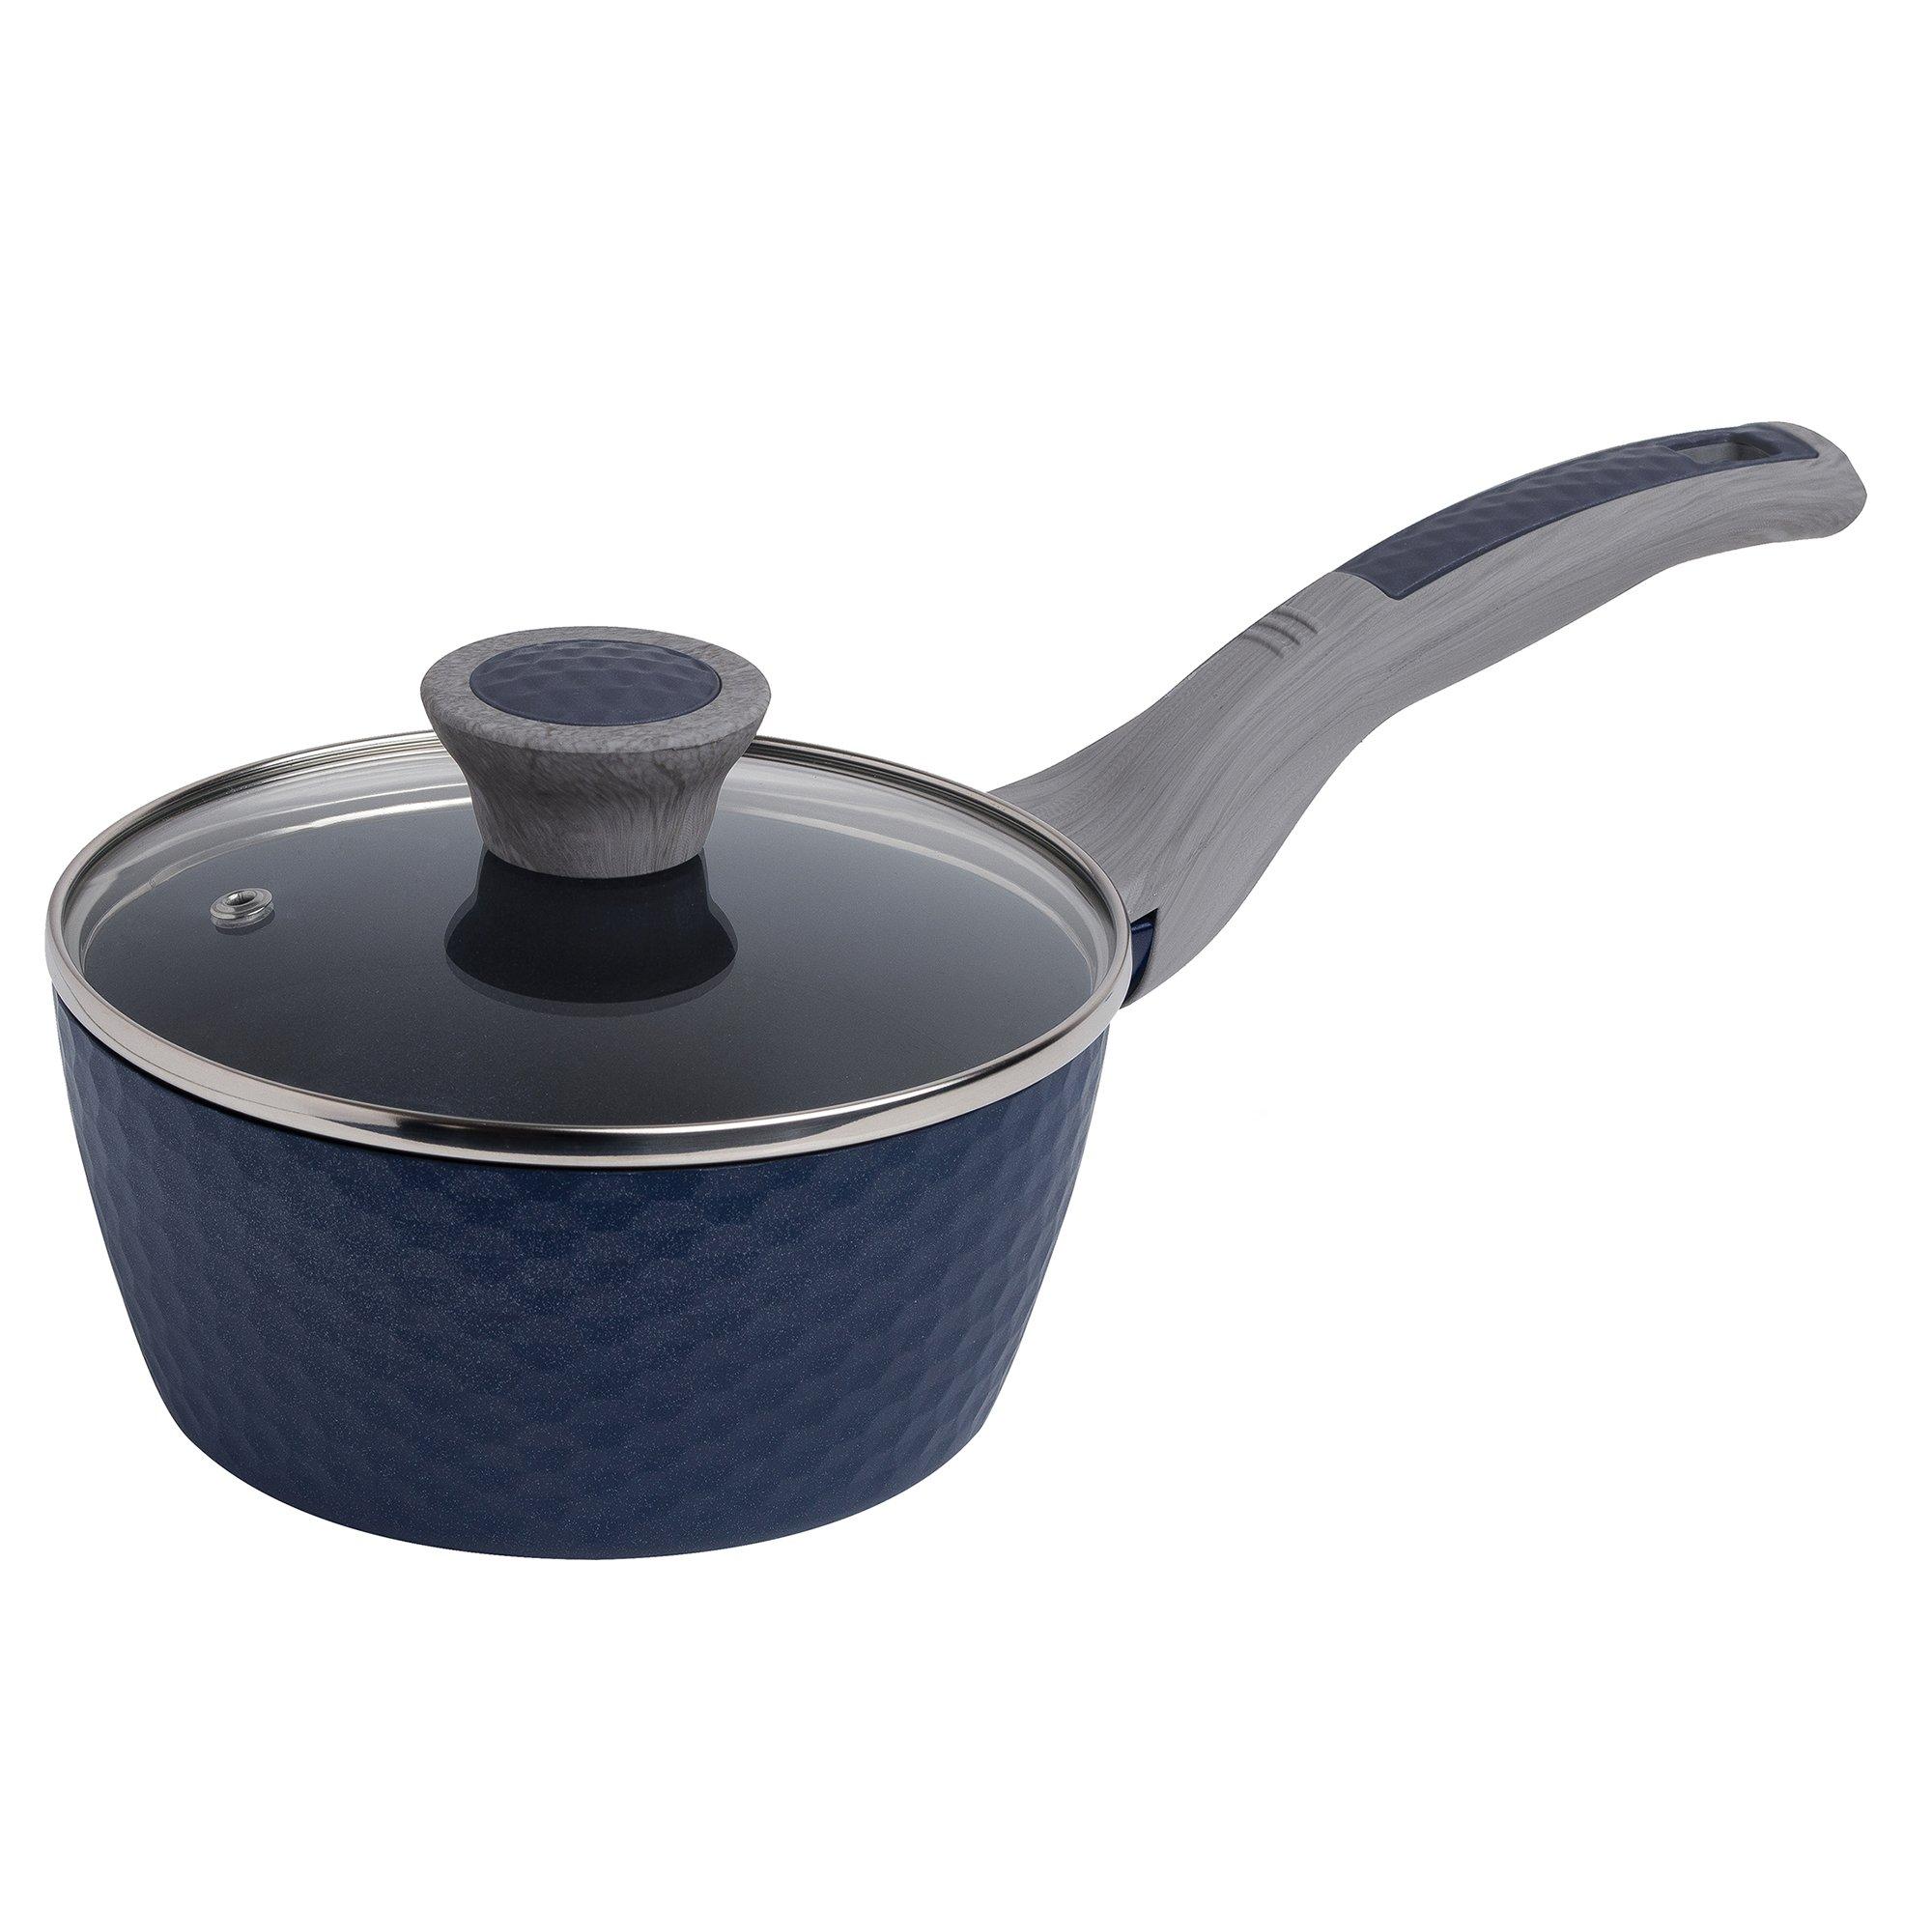 IKO 12'' Diamond Ceramic Fry Pan One Size Blue for sale online